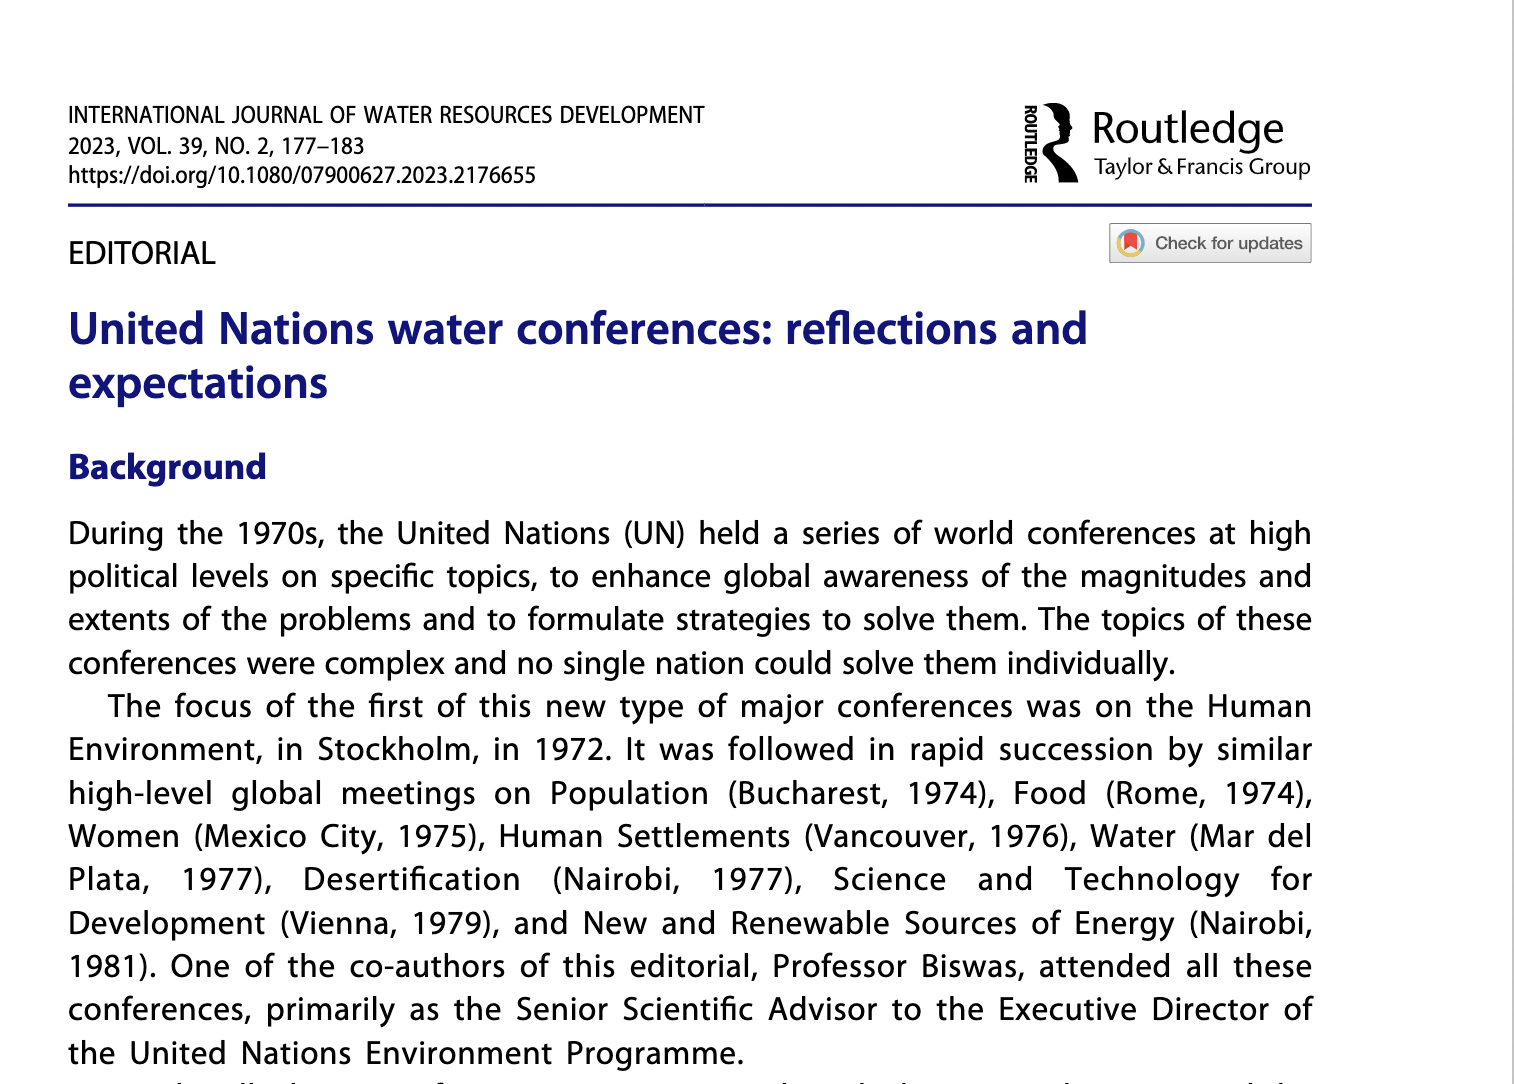 UNITED NATIONS WATER CONFERENCES: REFLECTIONS AND EXPECTATIONS. See our views on Mar del Plata water conference, organised in 1977, and what can...